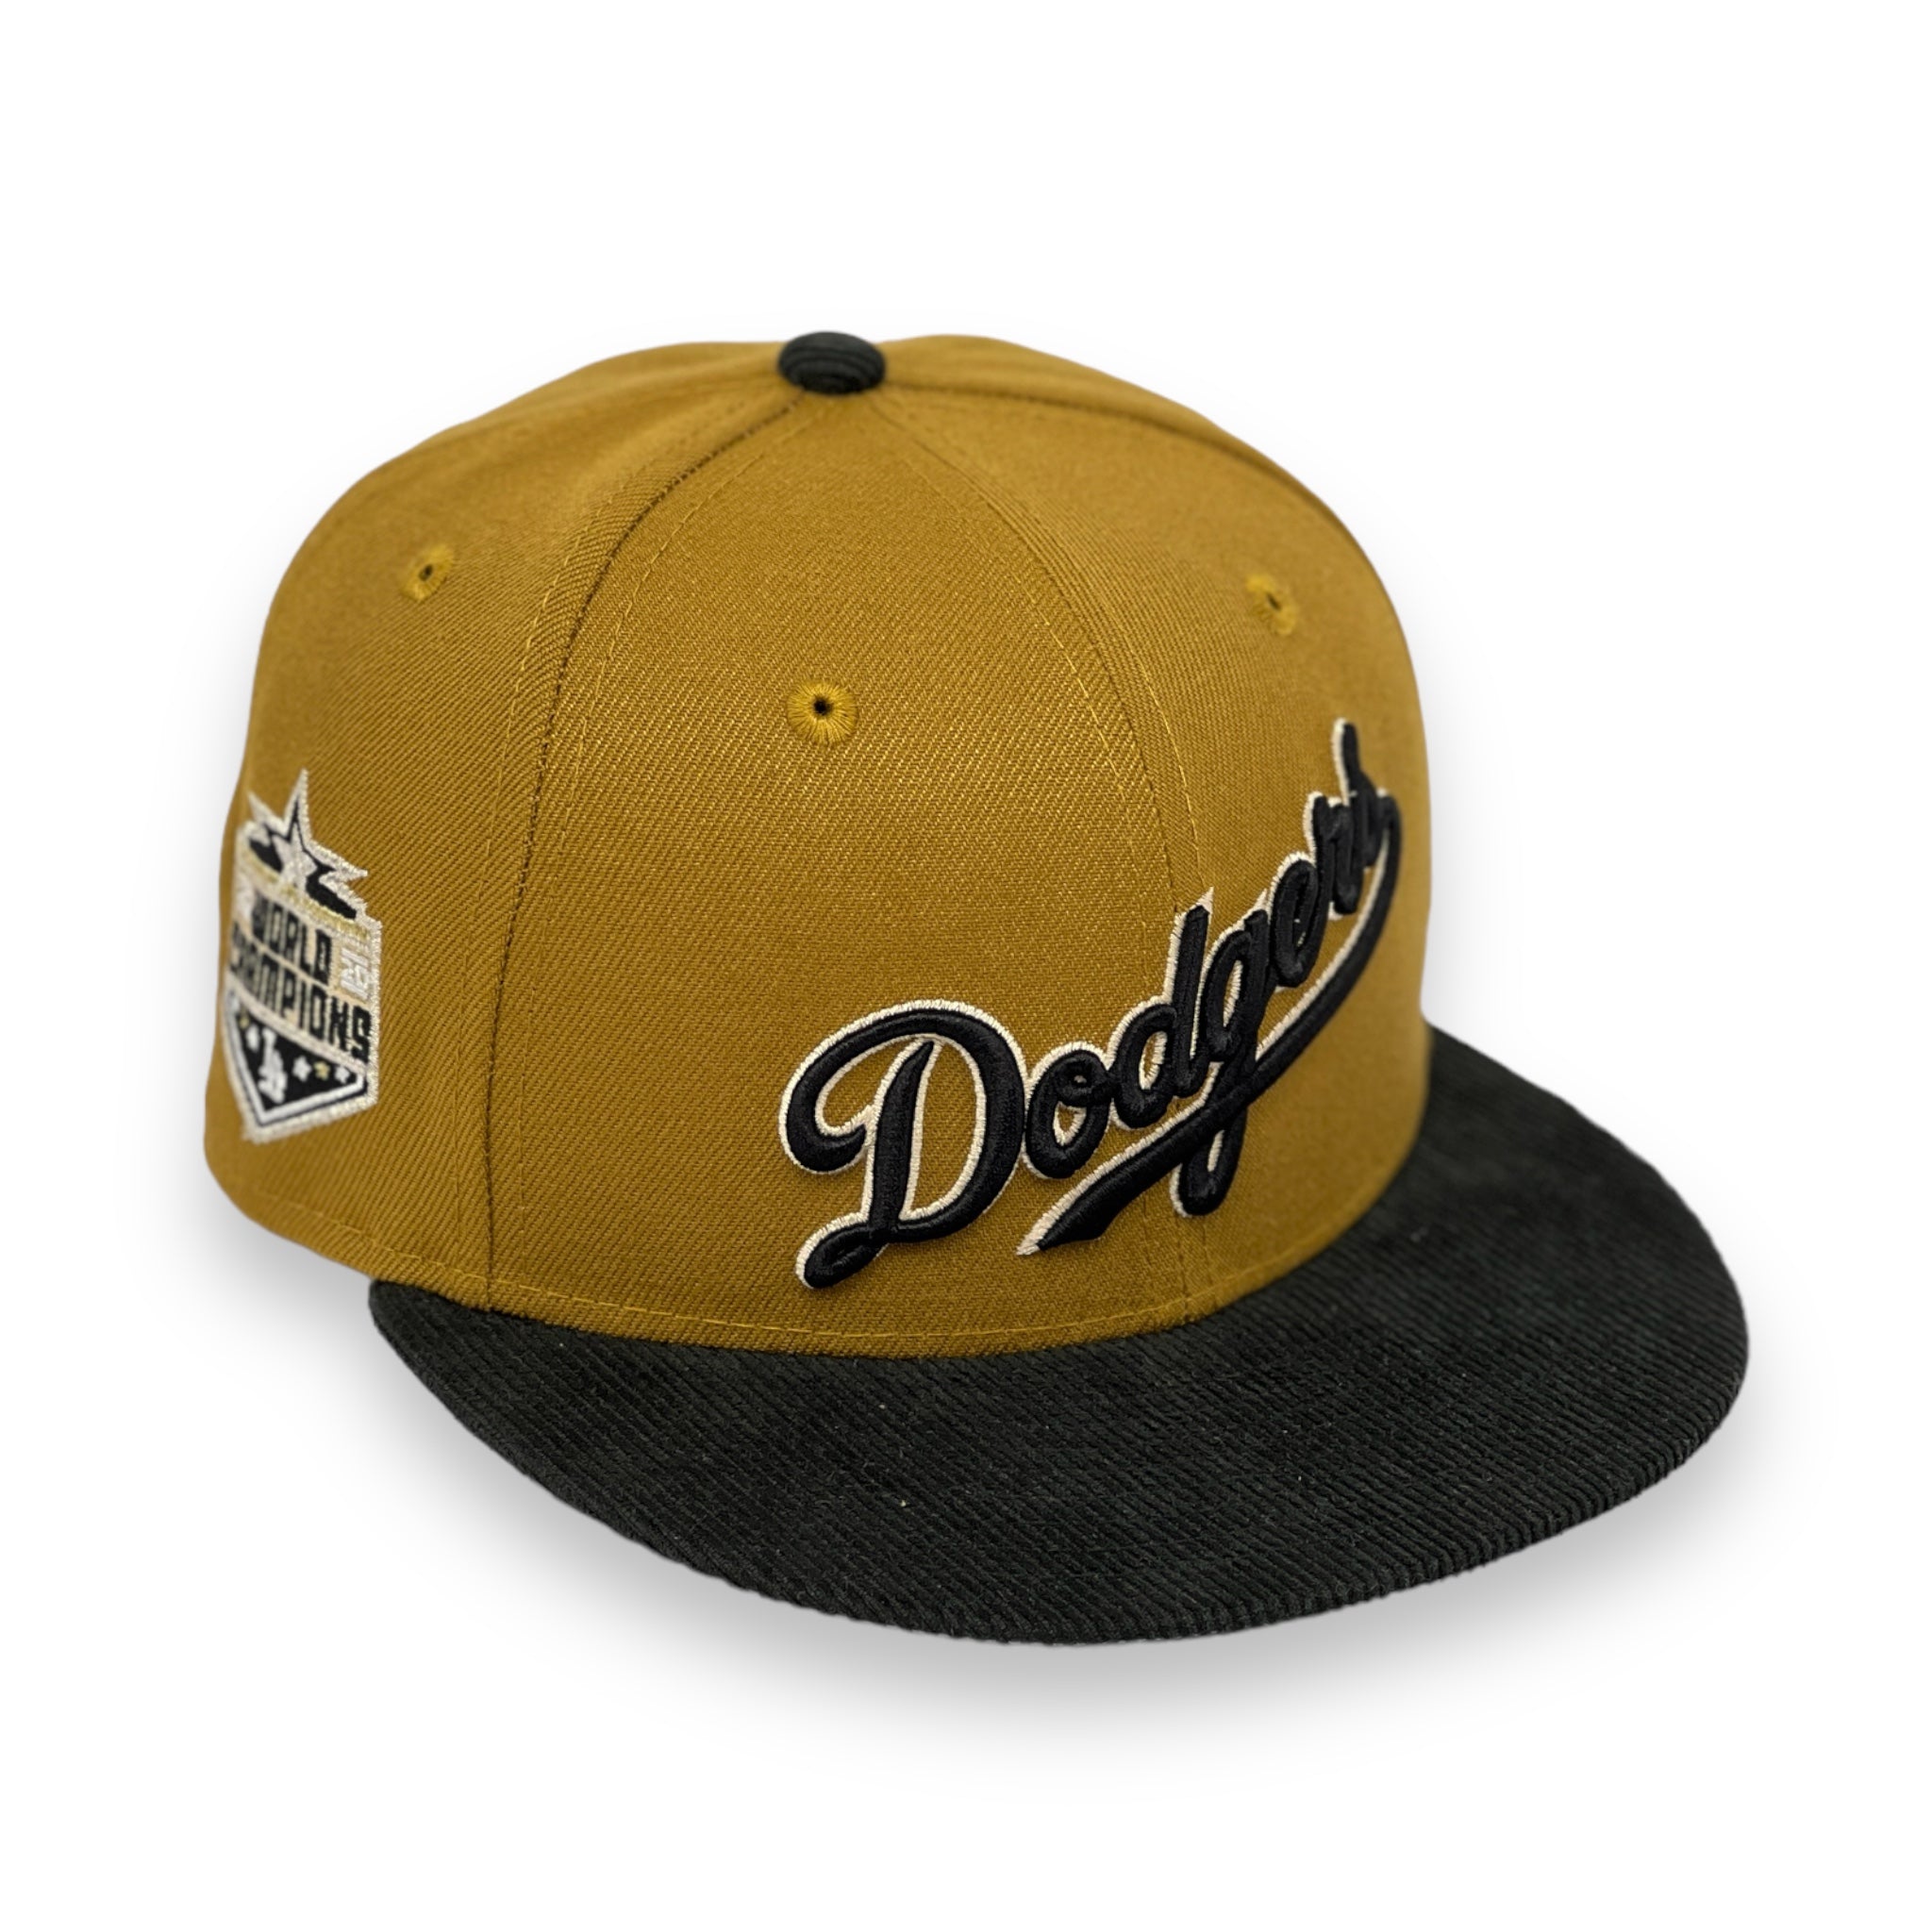 LOS ANGELES DODGERS (OLD GOLD) (2020 WORLDSERIES) NEW ERA 59FIFTY FITTED